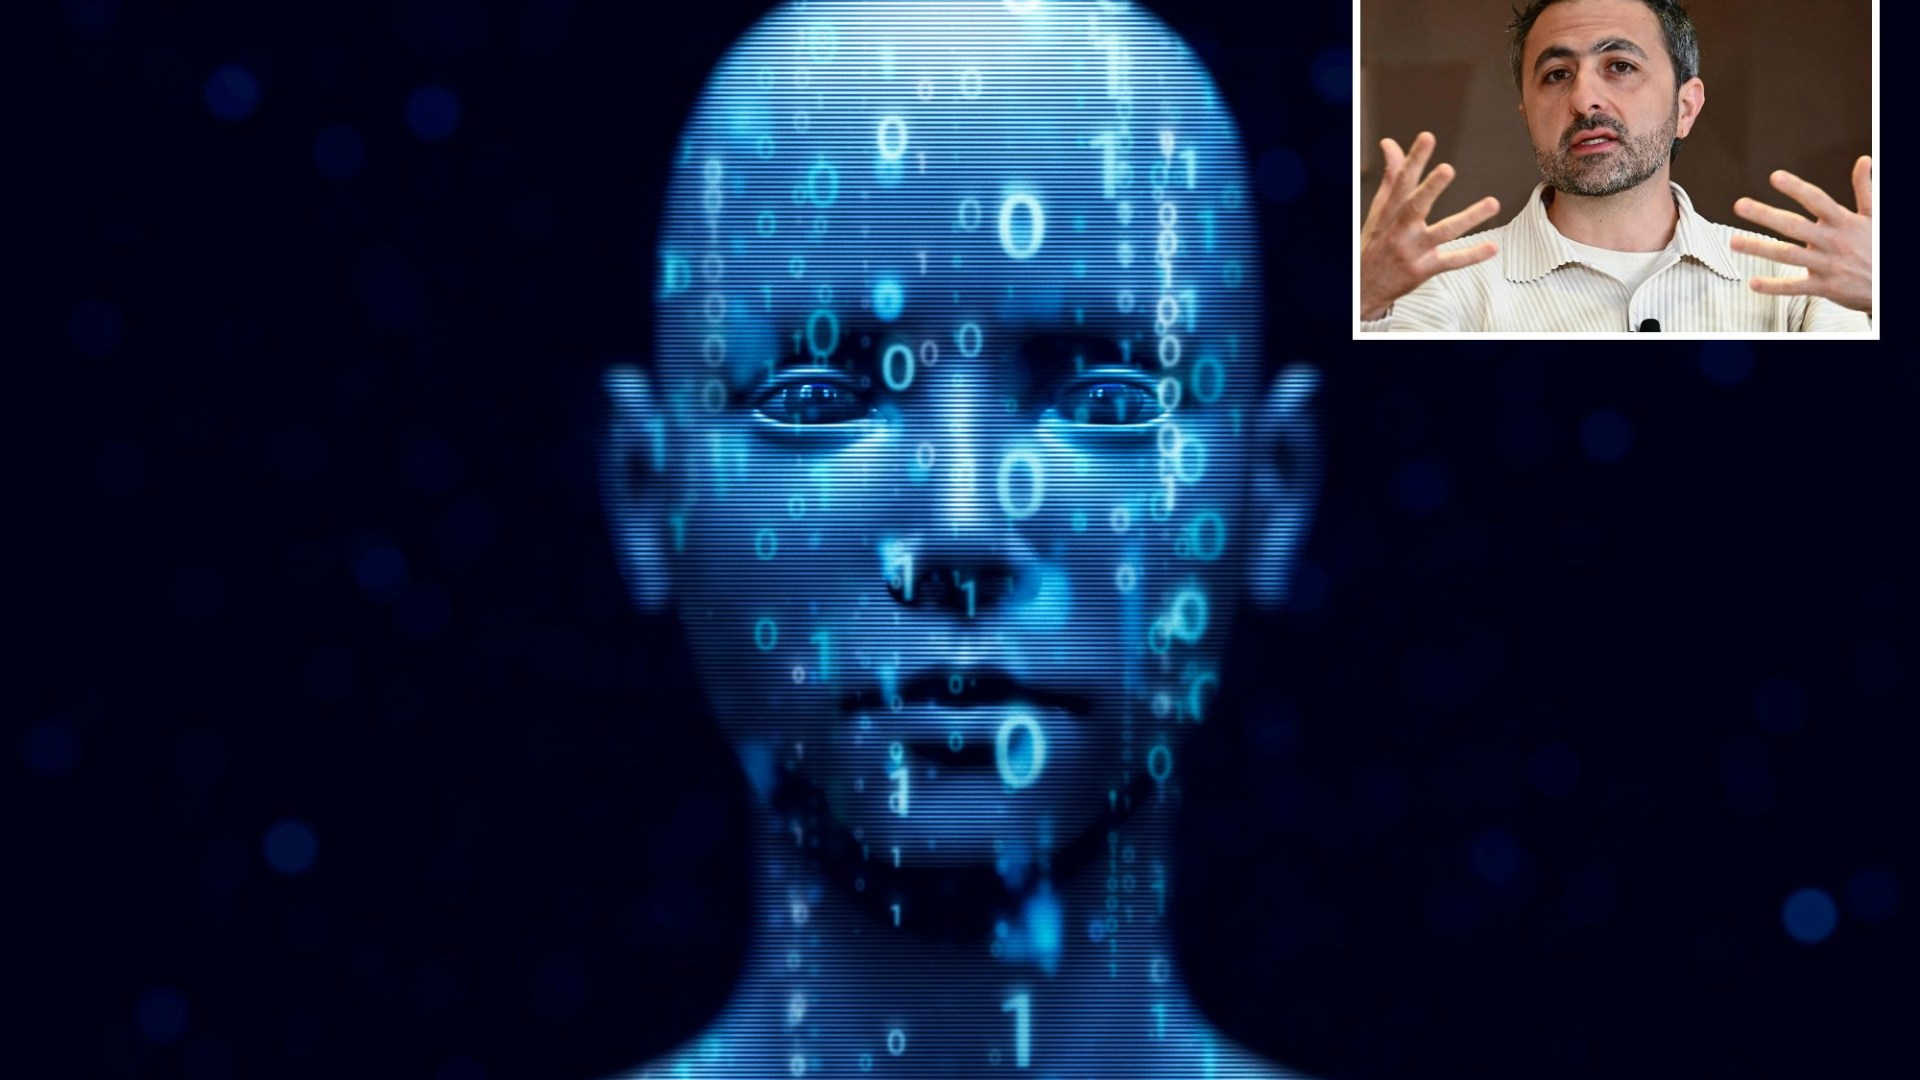 Unlock the Future: Microsoft CEO predicts AI’s transformation into an ‘infinitely knowledgeable’ digital species with near-perfect IQ